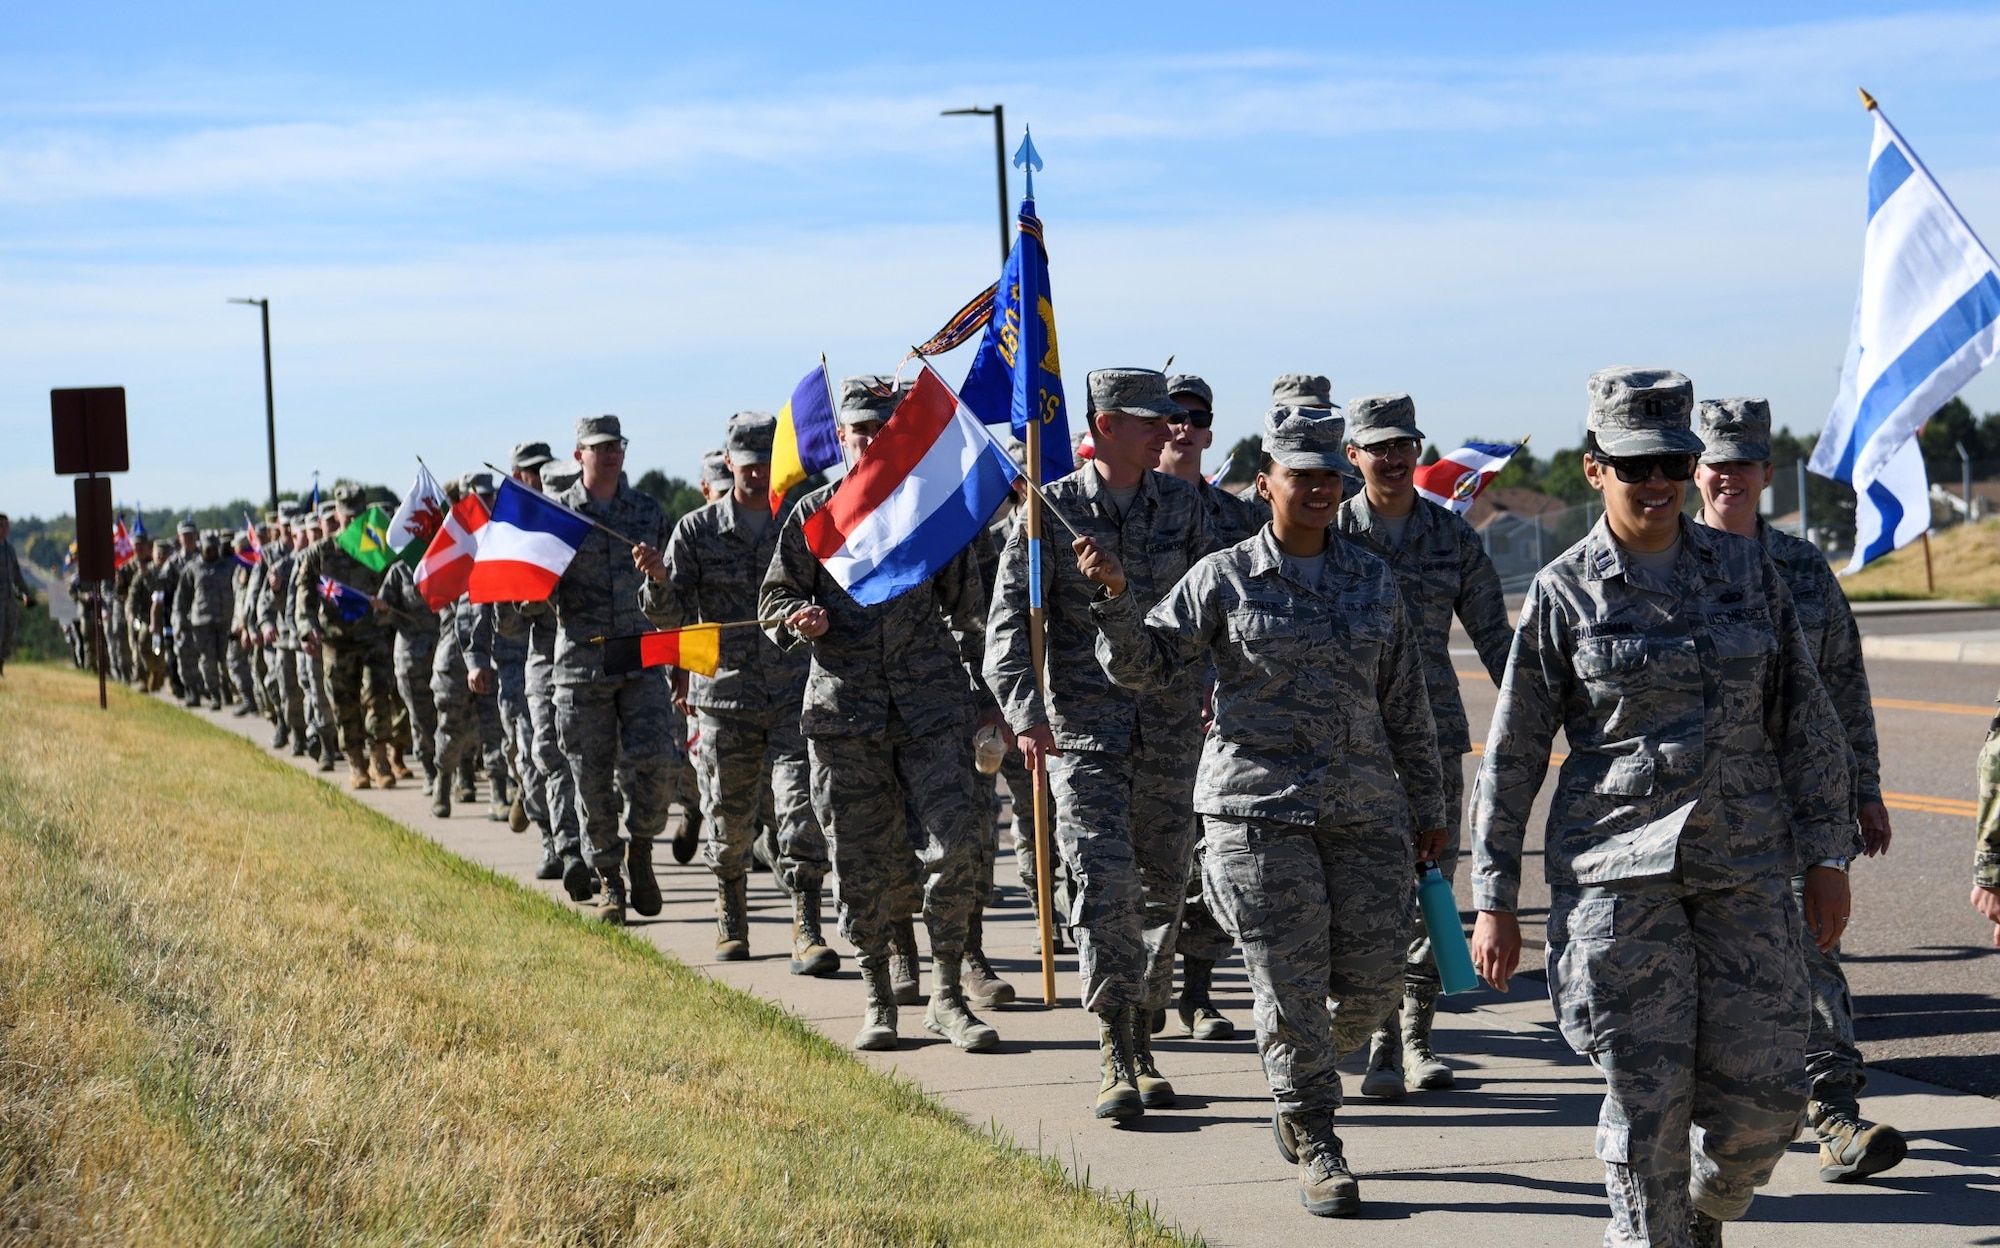 Members of Team Buckley took part in the Diversity Day march, Sept. 26, 2019, on Buckley Air Force Base, Colo. During the 1 mile march, participants held up flags from countries around the world. (U.S. Air Force photo by Senior Airman Michael D. Mathews)